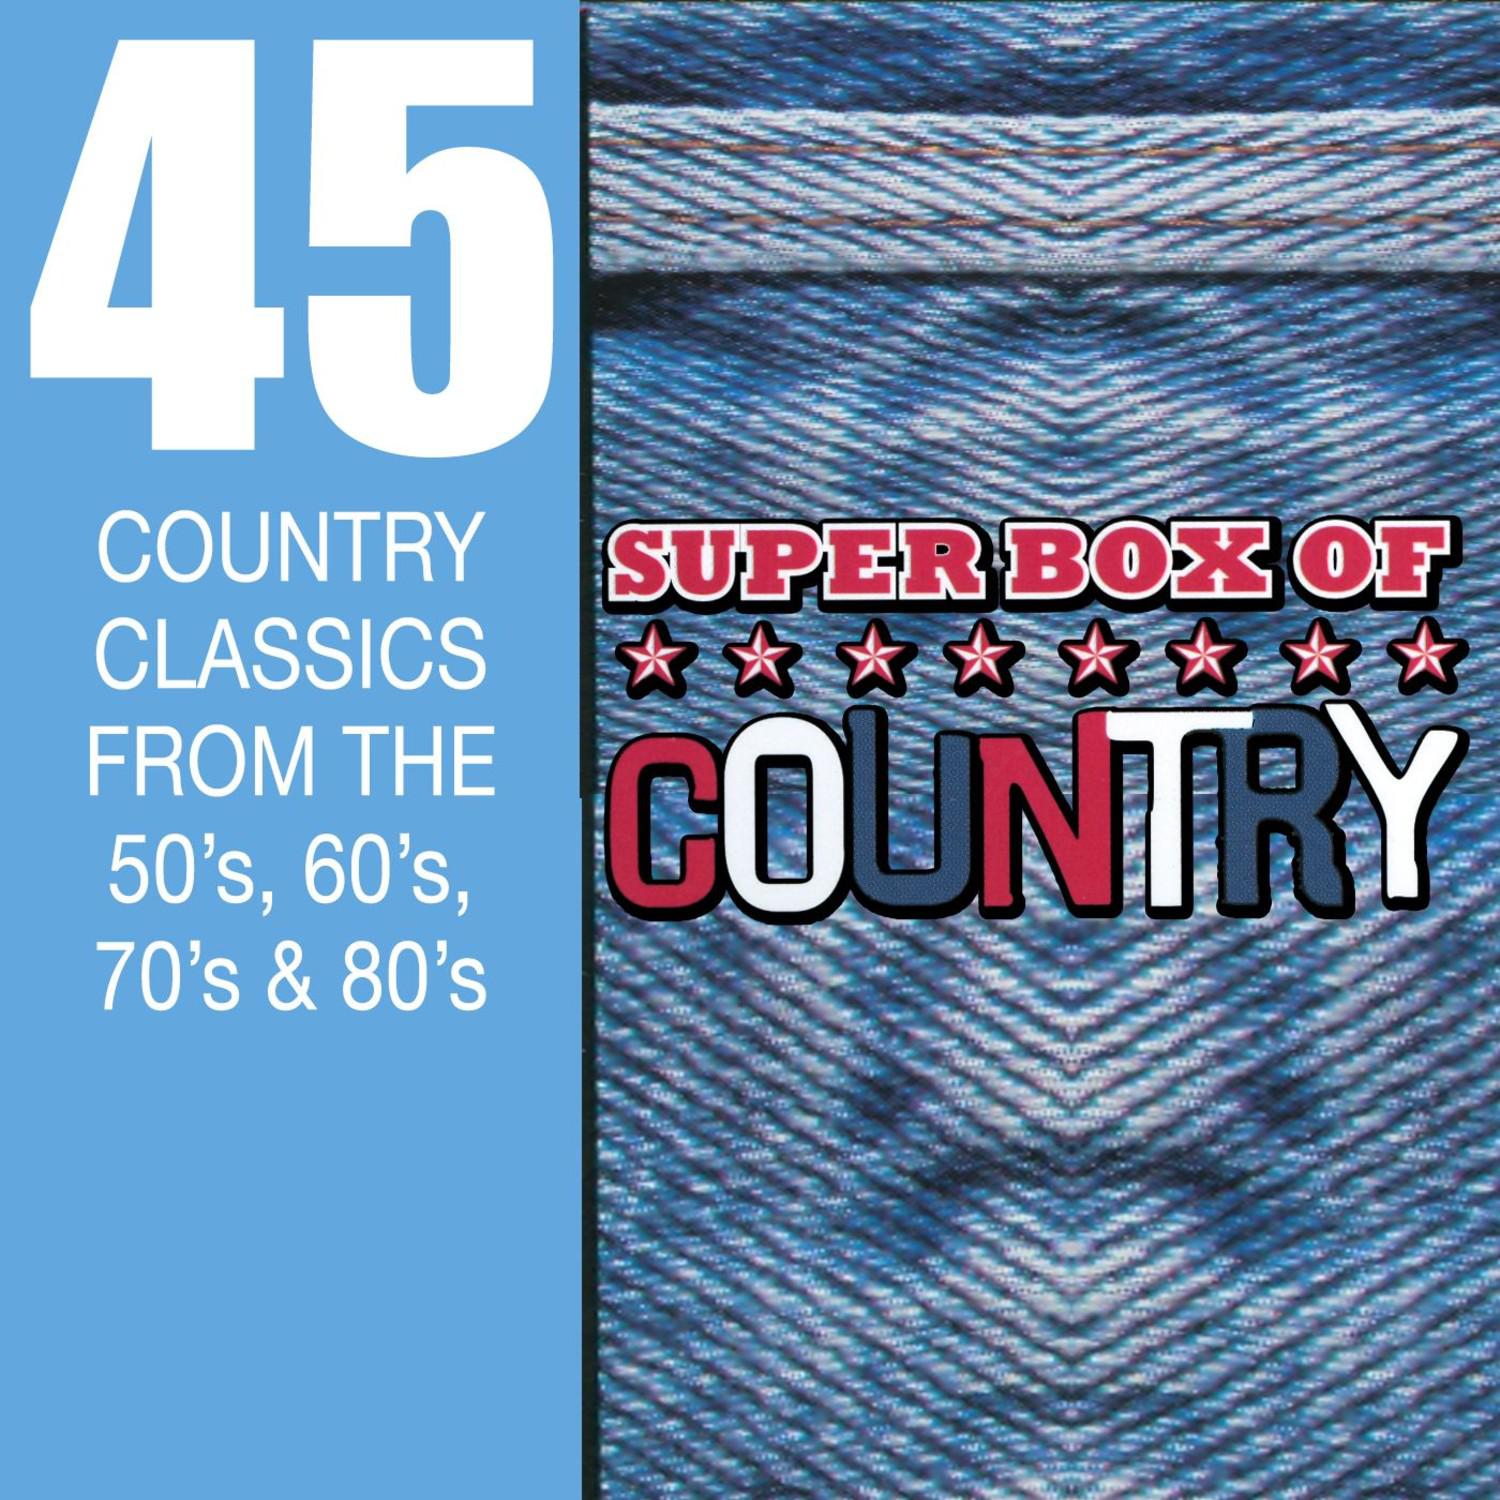 Super Box Of Country - 45 Country Classics From The 50's, 60's, 70's & 80's